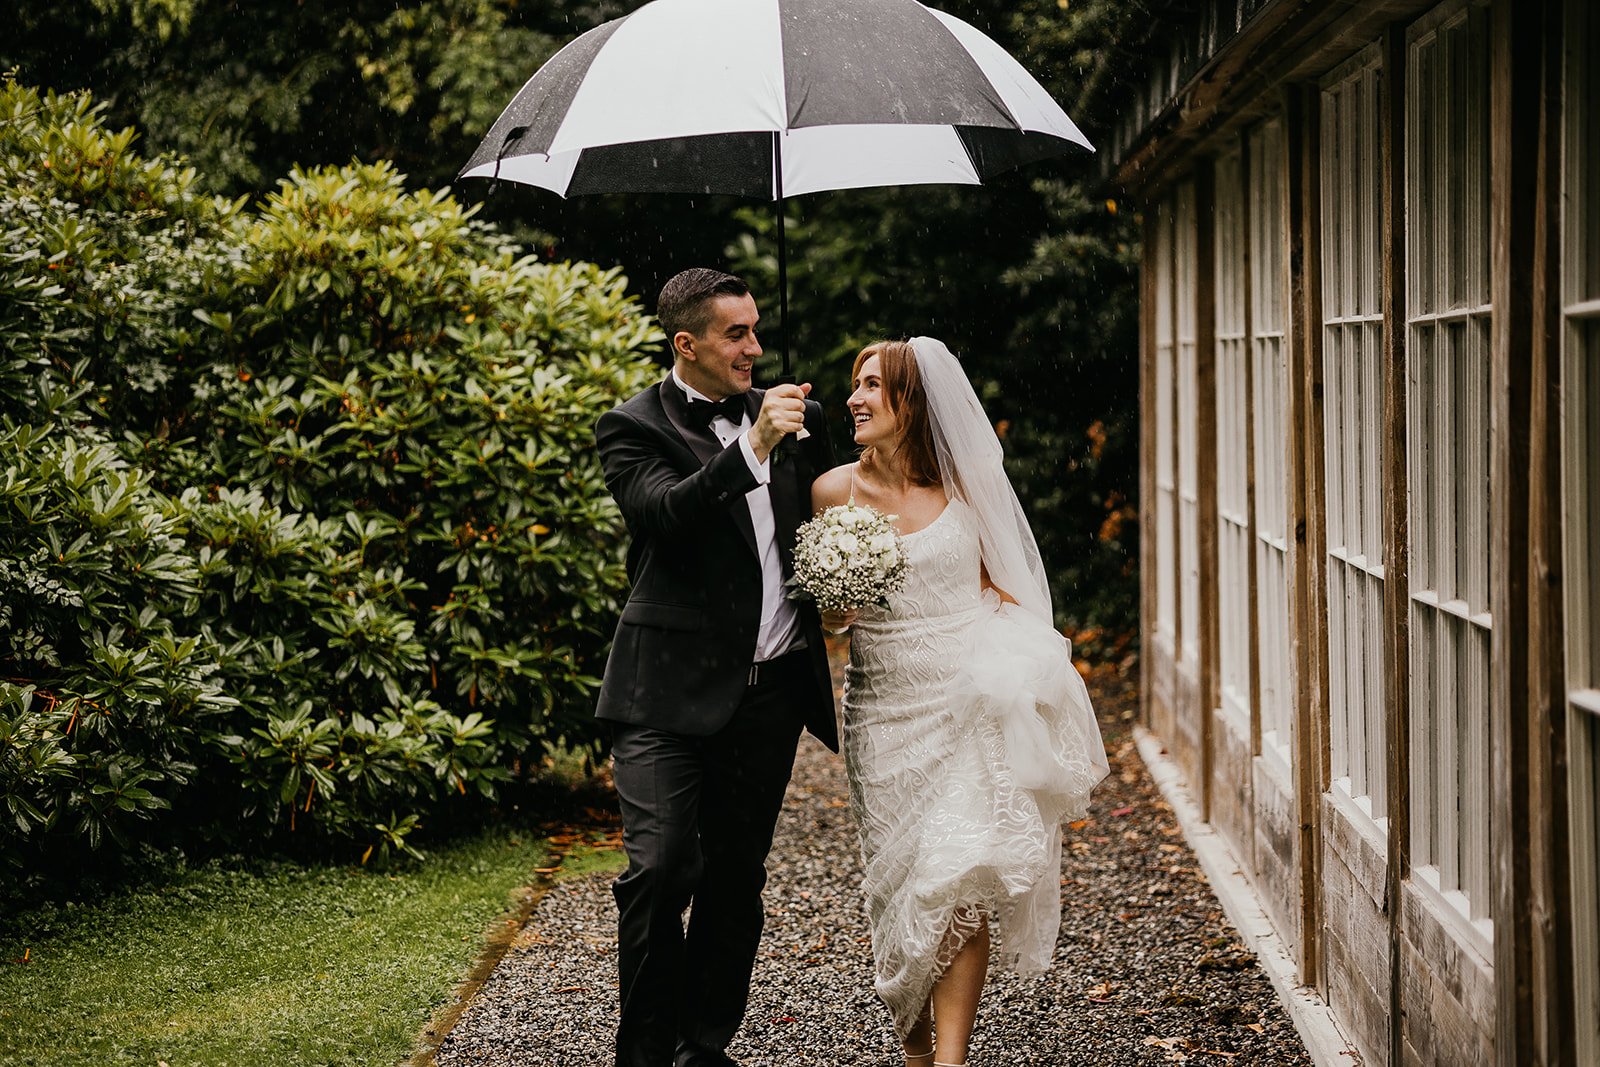 Irish wedding weather - Dont worry about the weather on your big day